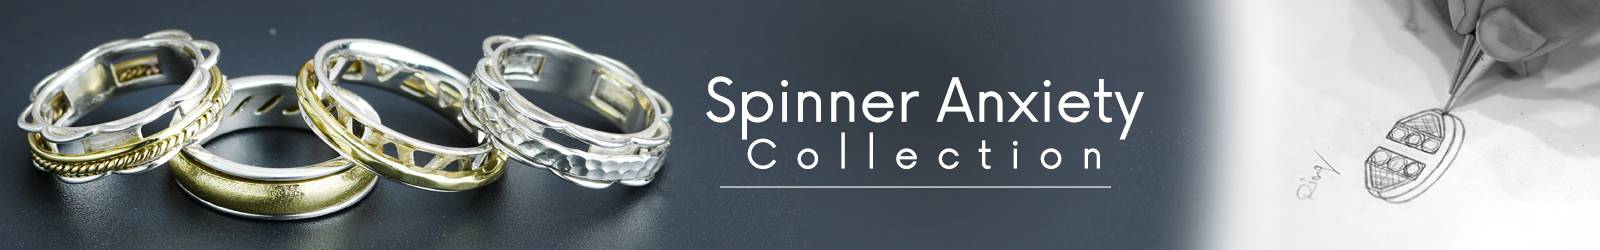 Spinner Anxiety Collection